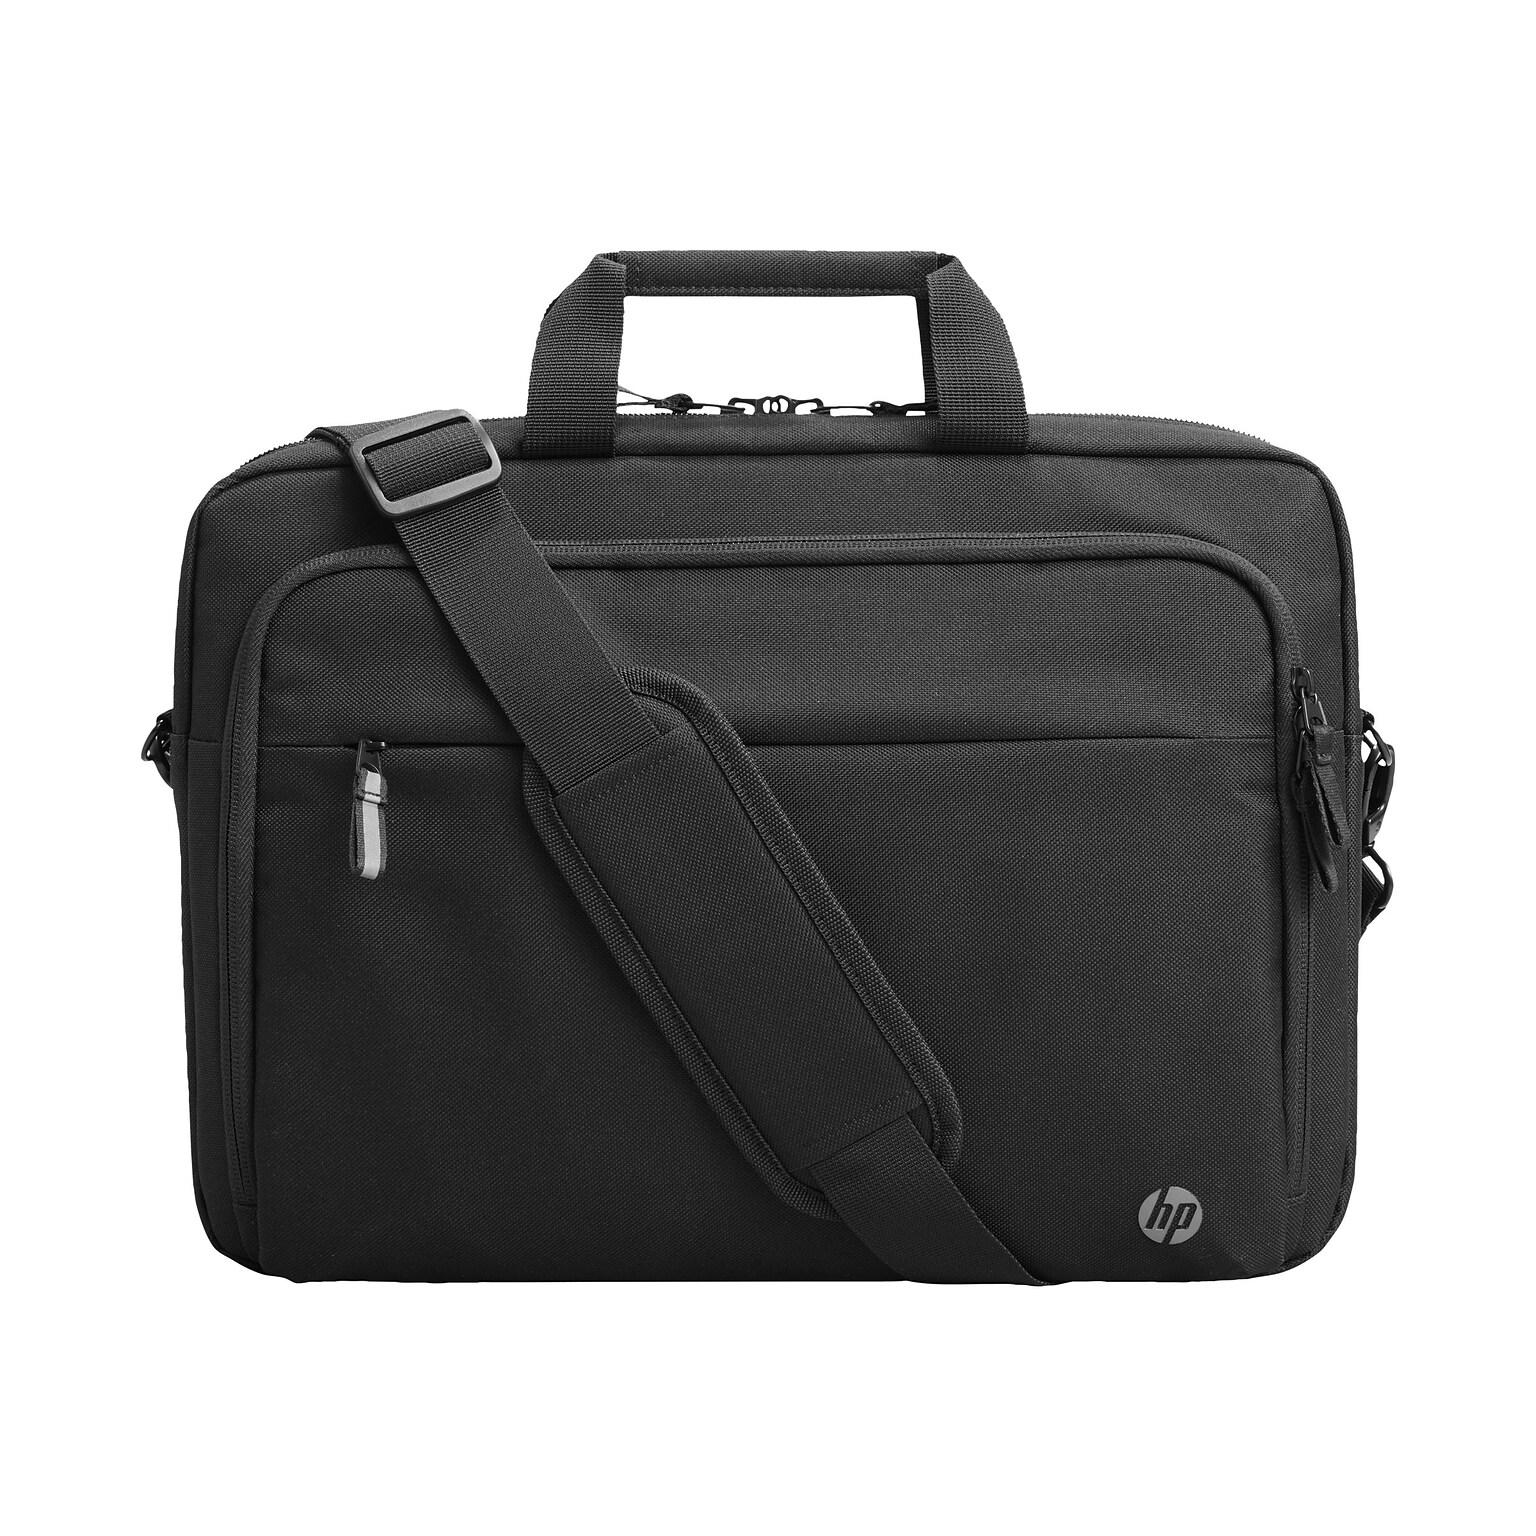 HP Professional 15.6 Polyester Laptop Bag, Black (500S7AA)